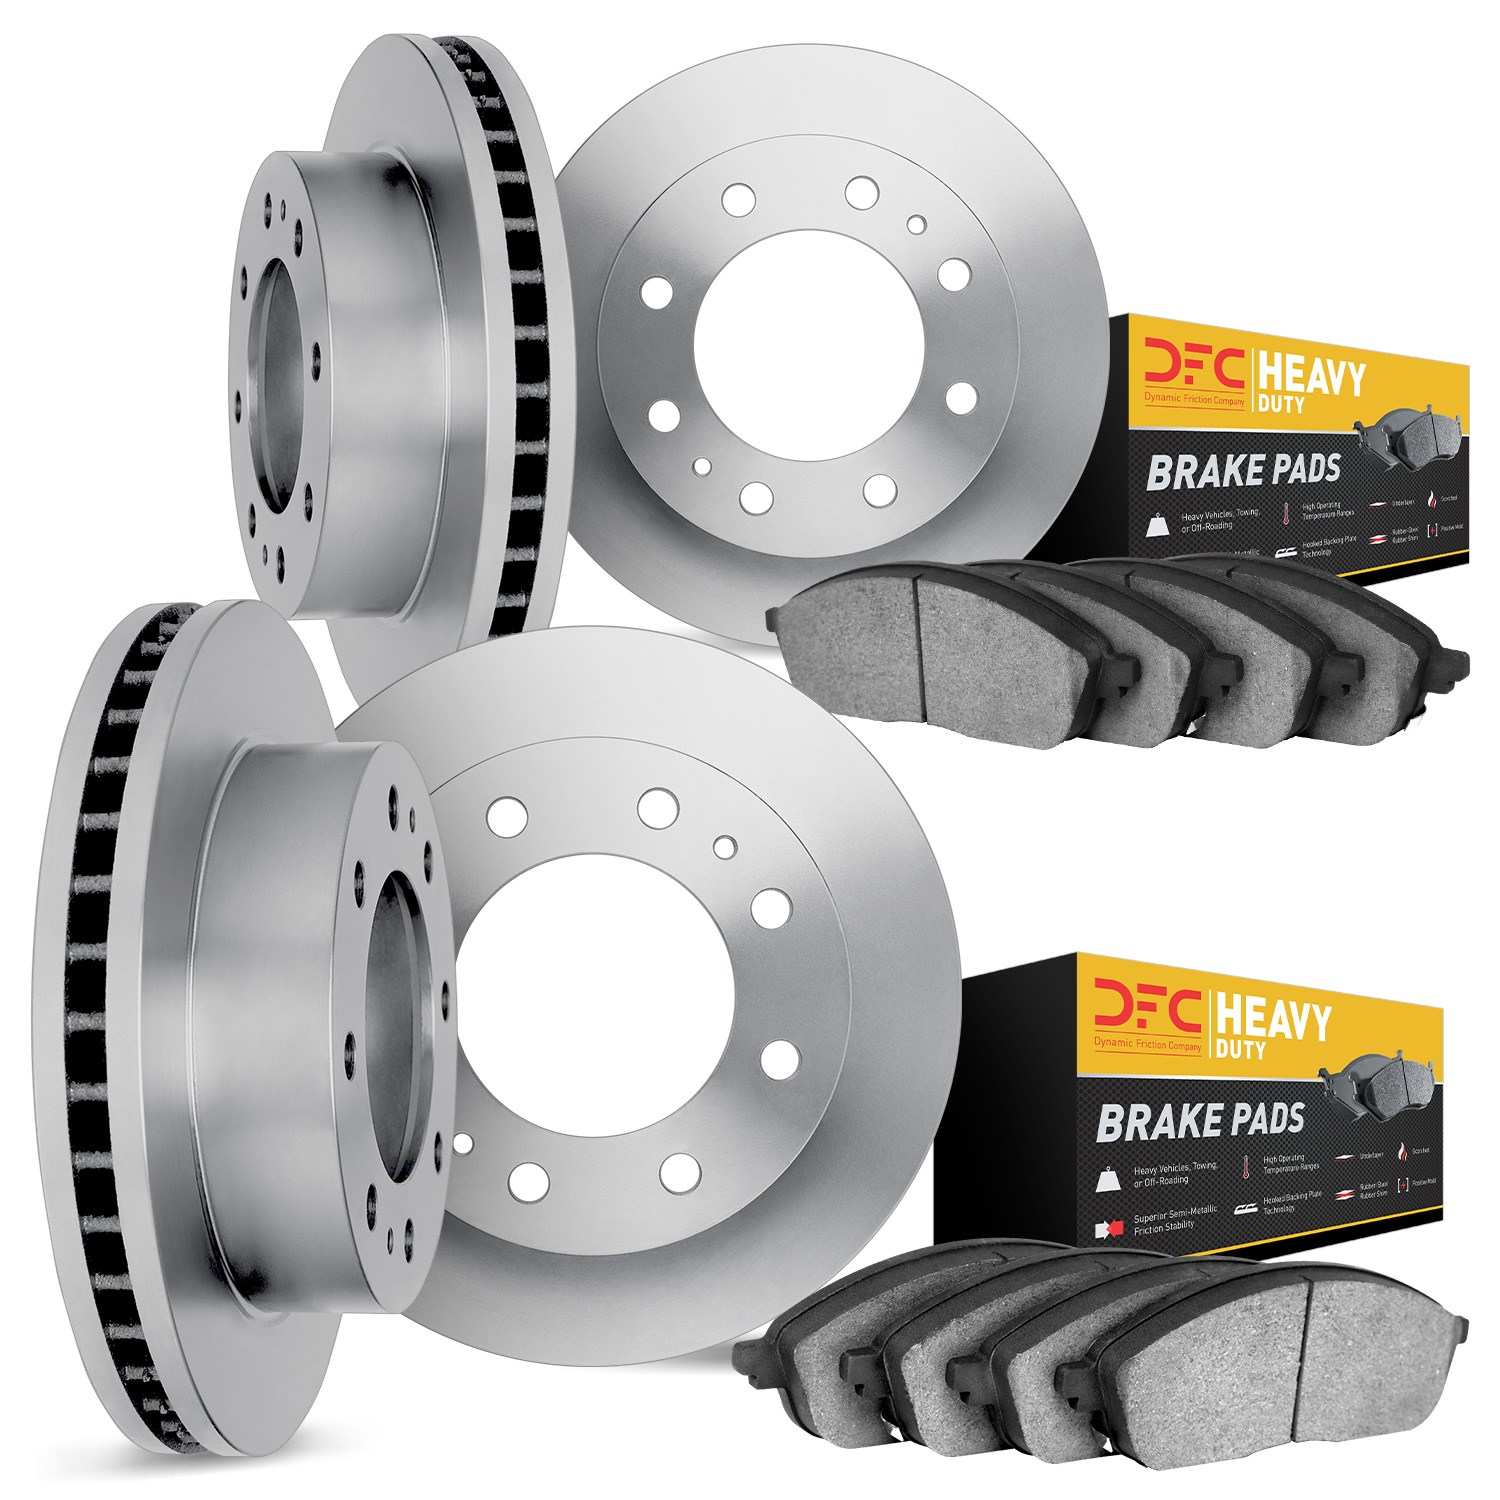 6204-99339 Brake Rotors w/Heavy-Duty Brake Pads Kit, Fits Select Ford/Lincoln/Mercury/Mazda, Position: Front and Rear